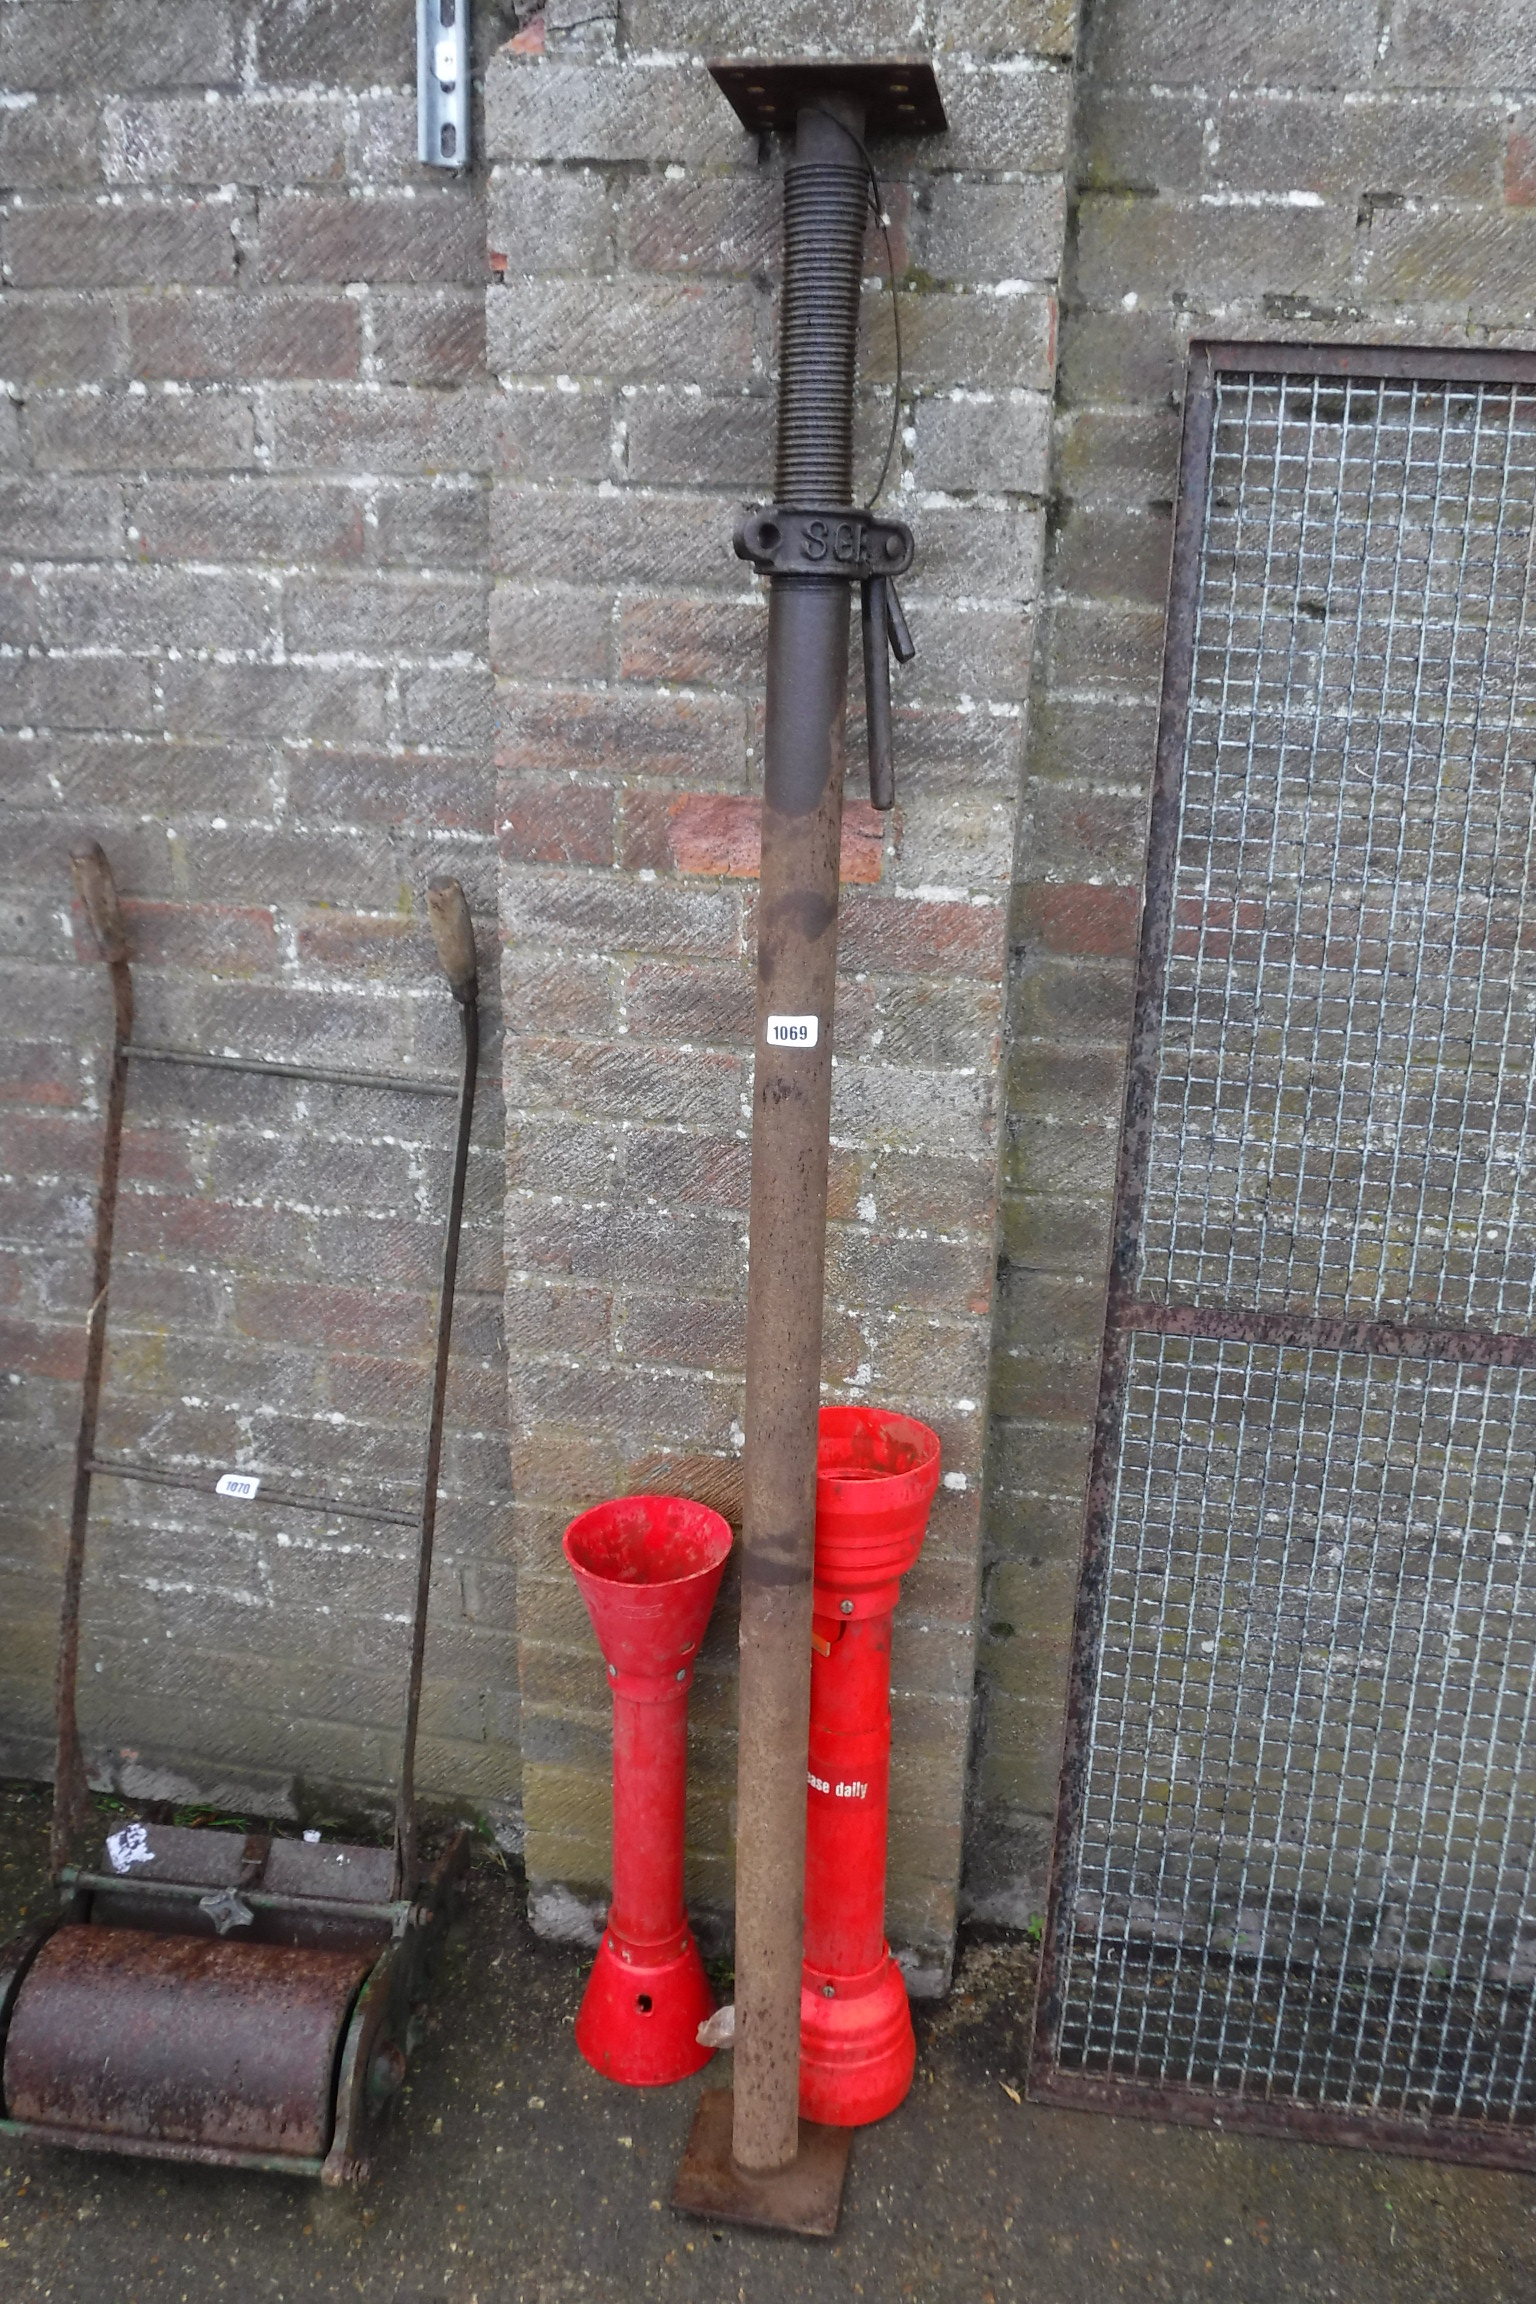 Acro prop with pair of red plastic stands